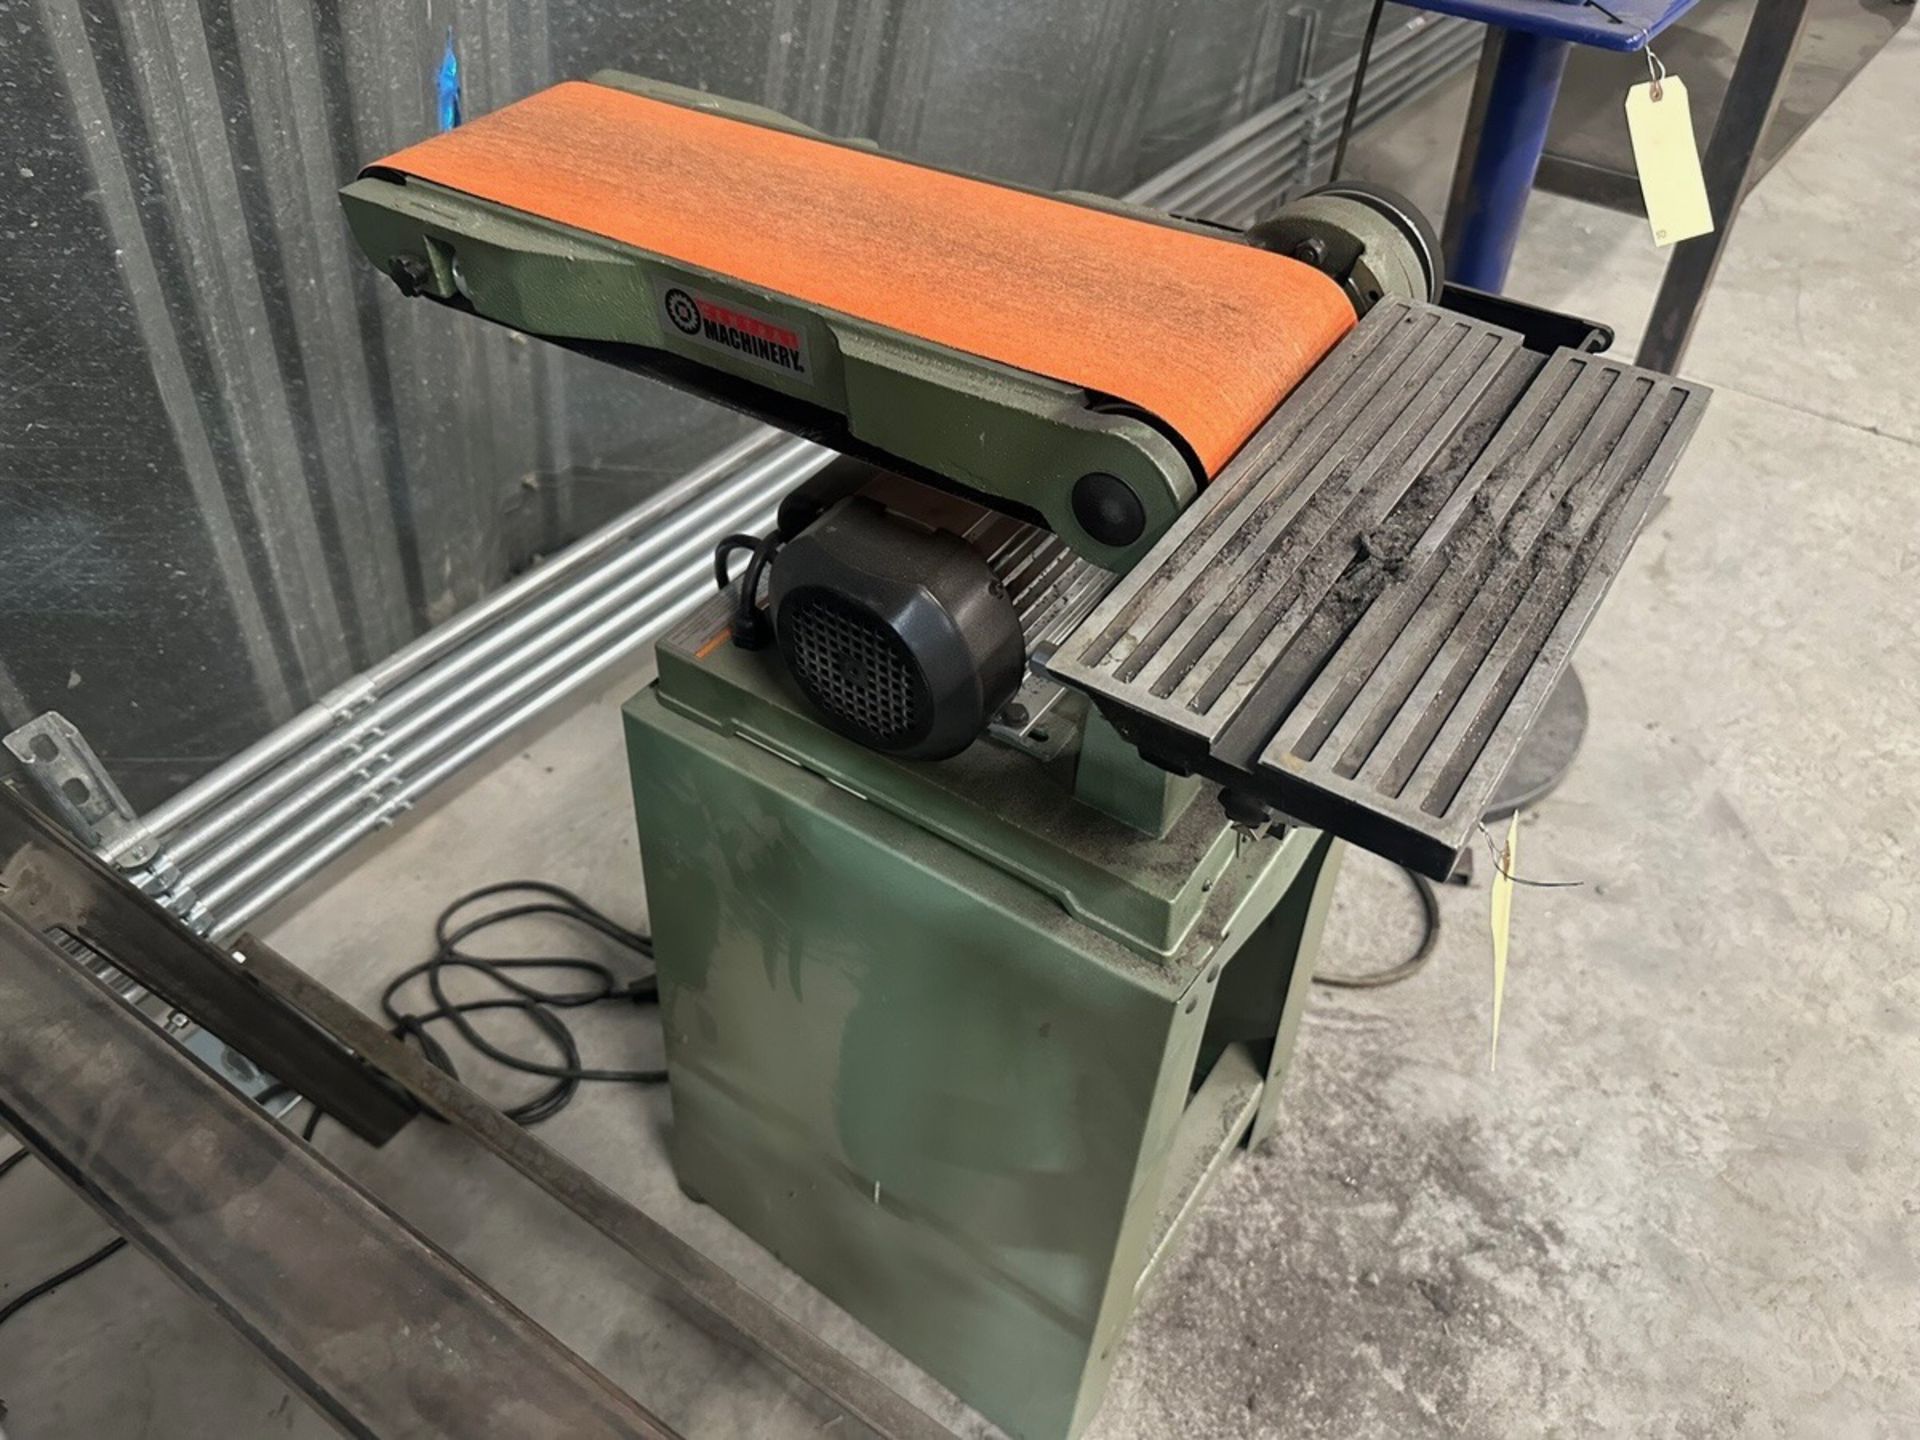 Central Machinery, Combination Sander, Item 61750, S/N 358451841 | Rig Fee $35 - Image 3 of 4